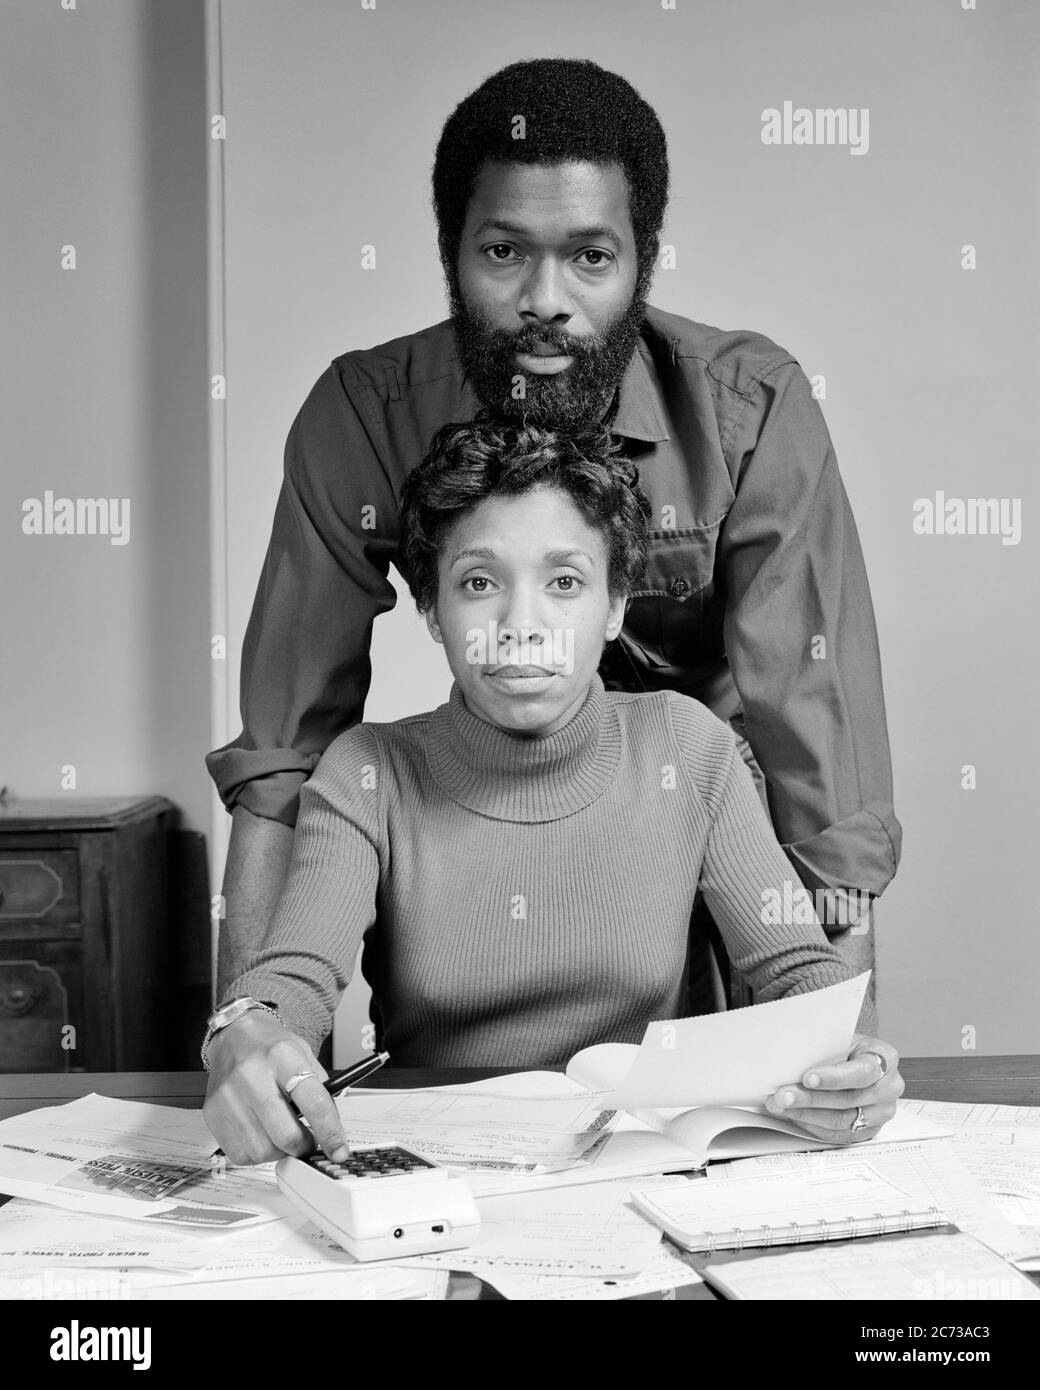 1970s AFRICAN-AMERICAN COUPLE LOOKING AT CAMERA MAN STANDING BEHIND WOMAN SITTING AT TABLE WITH PAPERS BILLS HAND ON CALCULATOR - s21331 HAR001 HARS CALCULATOR FACIAL BUDGET STYLE COMMUNICATION TEAMWORK LIFESTYLE FEMALES MARRIED SPOUSE HUSBANDS HOME LIFE COPY SPACE FRIENDSHIP HALF-LENGTH LADIES PERSONS MALES RISK EXPRESSIONS B&W PARTNER EYE CONTACT GOALS AFRICAN-AMERICANS AFRICAN-AMERICAN BLACK ETHNICITY INNOVATION FACIAL HAIR CONNECTION BEARDS COOPERATION MID-ADULT MID-ADULT MAN MID-ADULT WOMAN SOLUTIONS TOGETHERNESS WIVES BLACK AND WHITE HAR001 OLD FASHIONED TURTLENECK UNSMILING Stock Photo